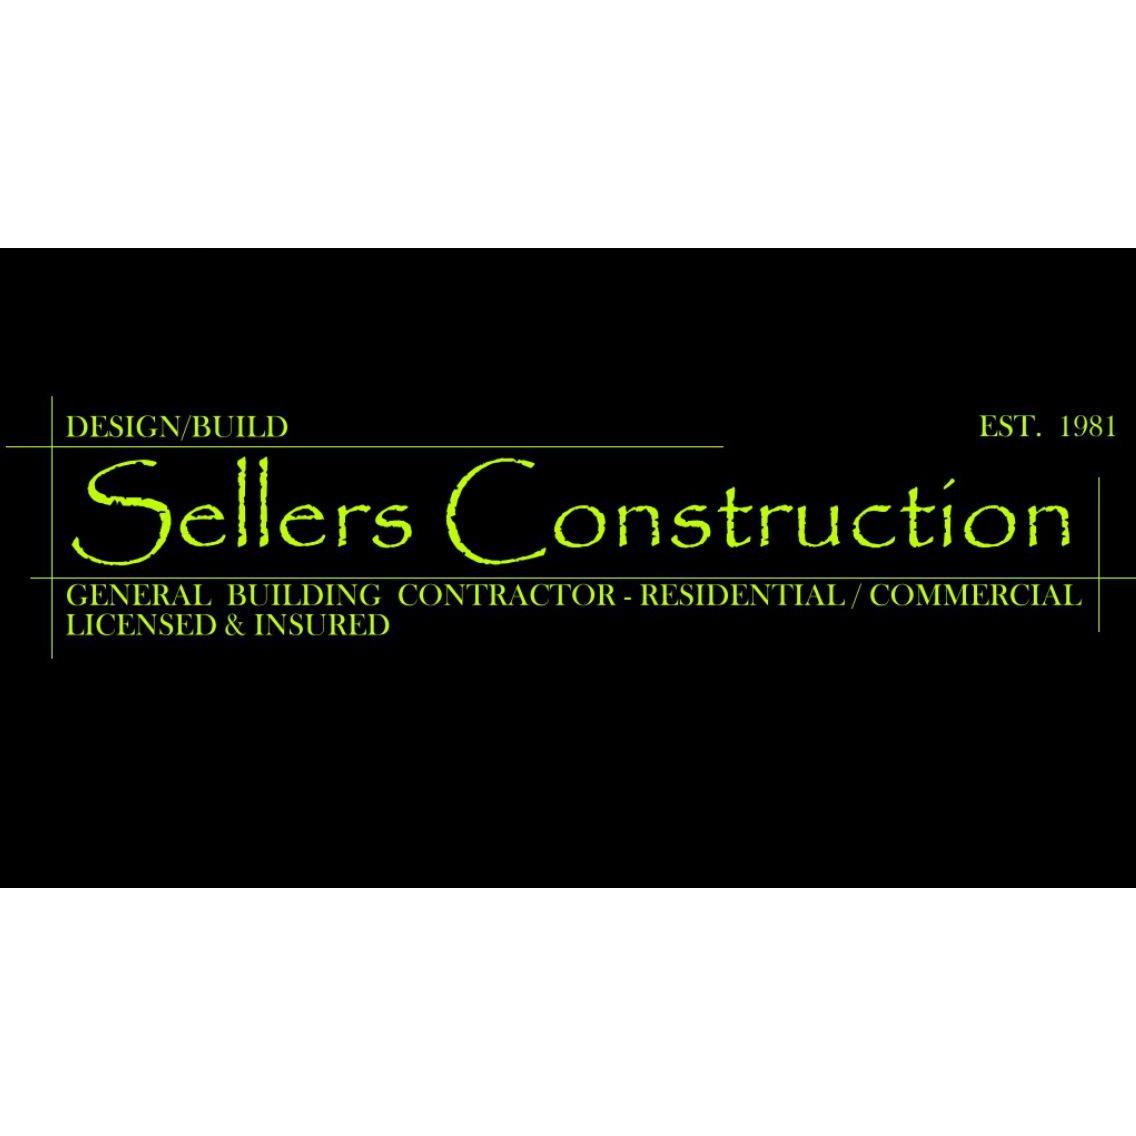 Sellers Construction 101 2nd Ave, Red Oak Iowa 51566